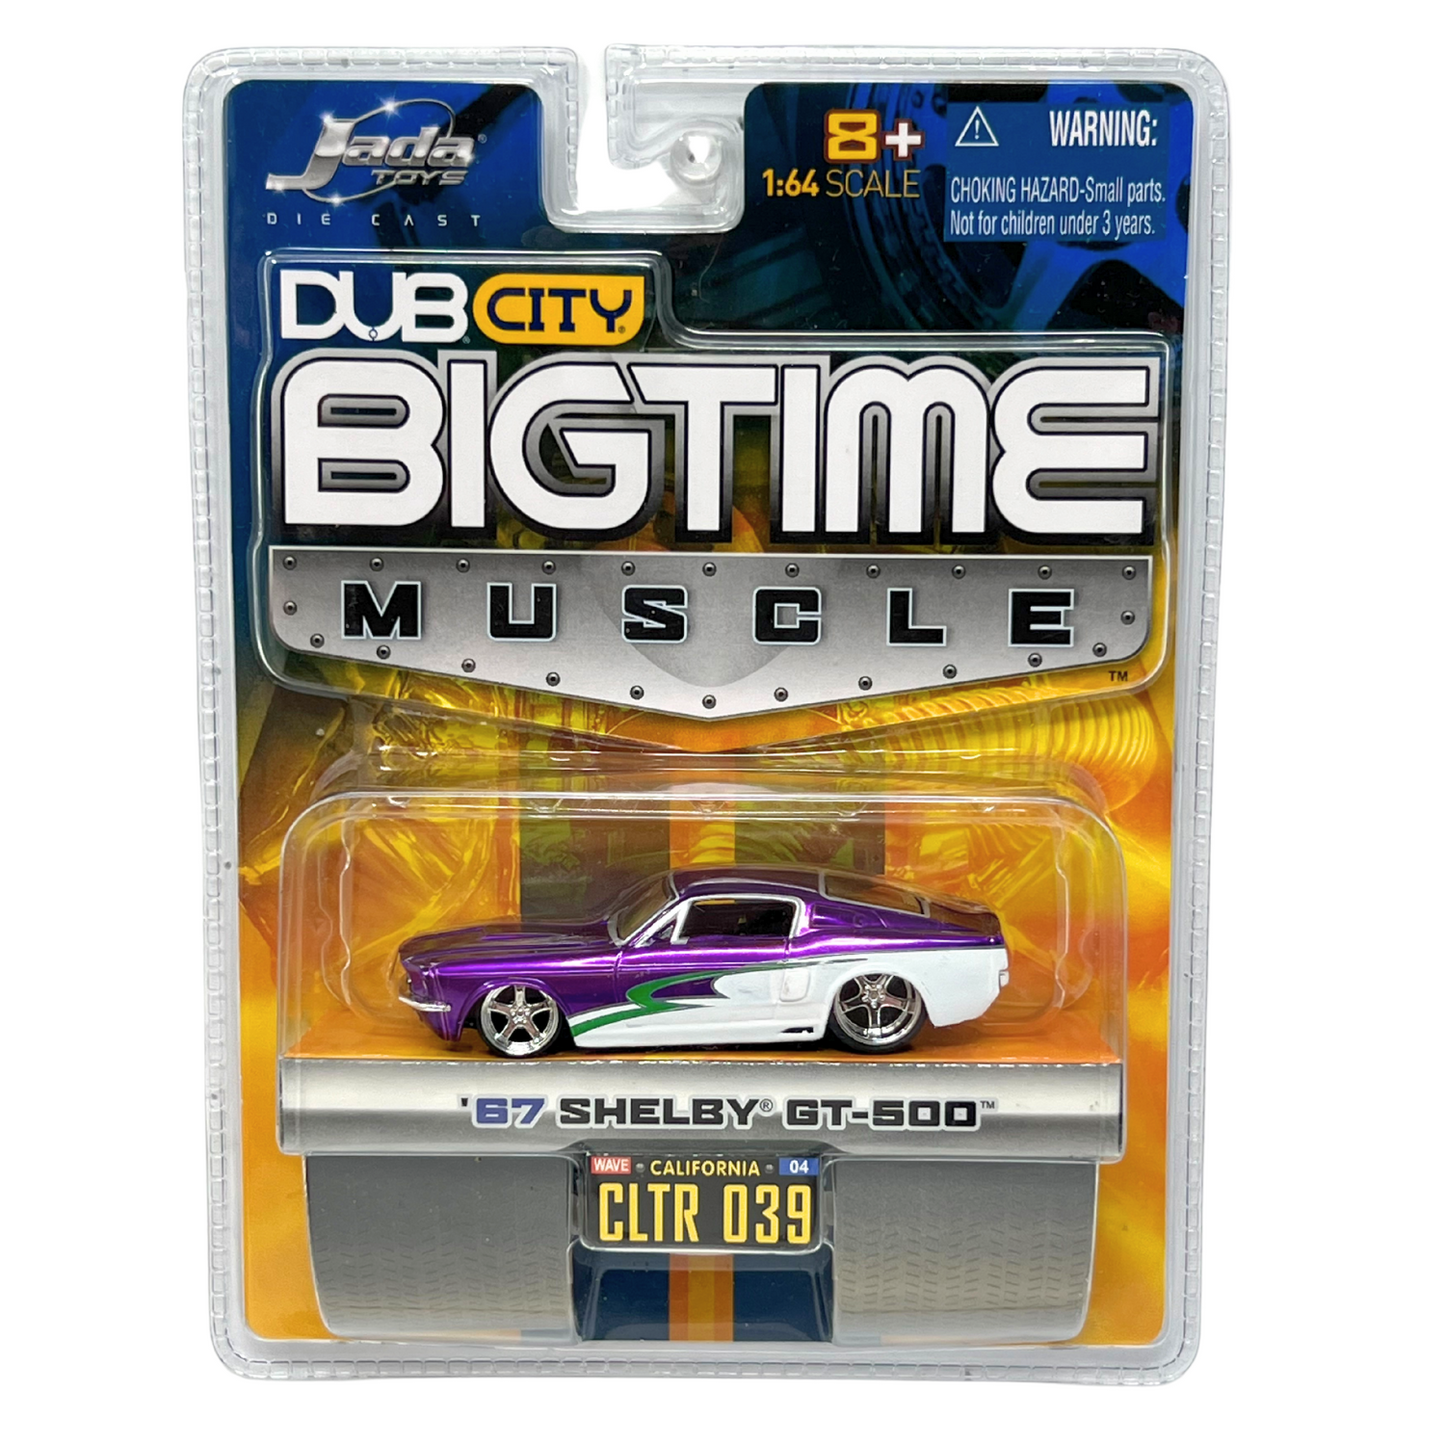 Jada Dub City Bigtime Muscle 1967 Shelby GT-500 1:64 Diecast Purple White